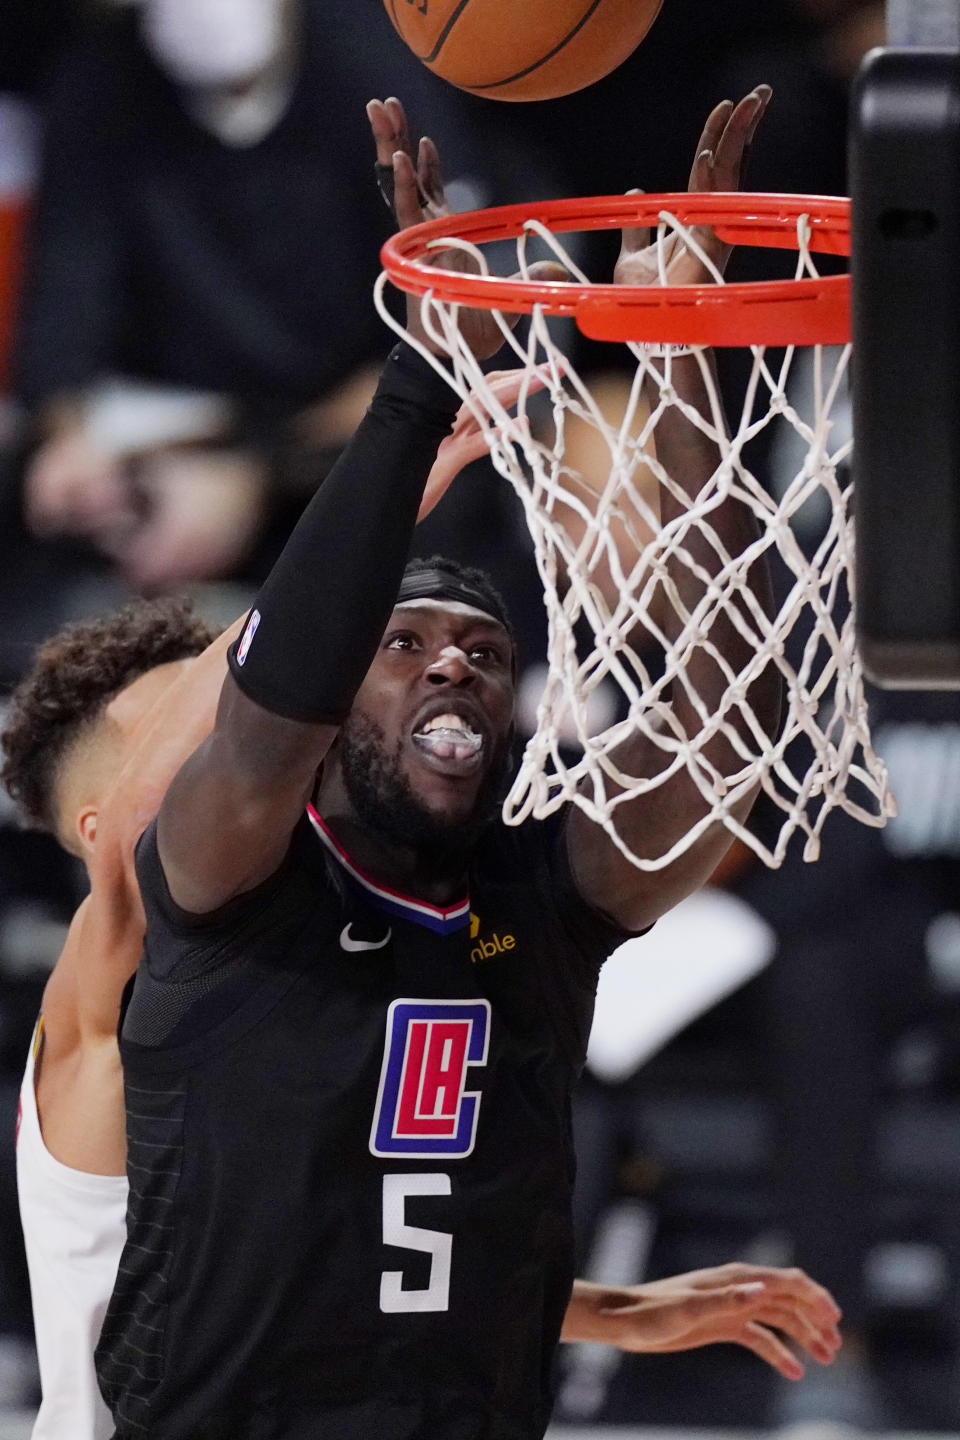 Los Angeles Clippers' Montrezl Harrell (5) shoots in front of Denver Nuggets' Michael Porter Jr. (1) in the second half of an NBA conference semifinal playoff basketball game Thursday, Sept 3, 2020, in Lake Buena Vista Fla. (AP Photo/Mark J. Terrill)